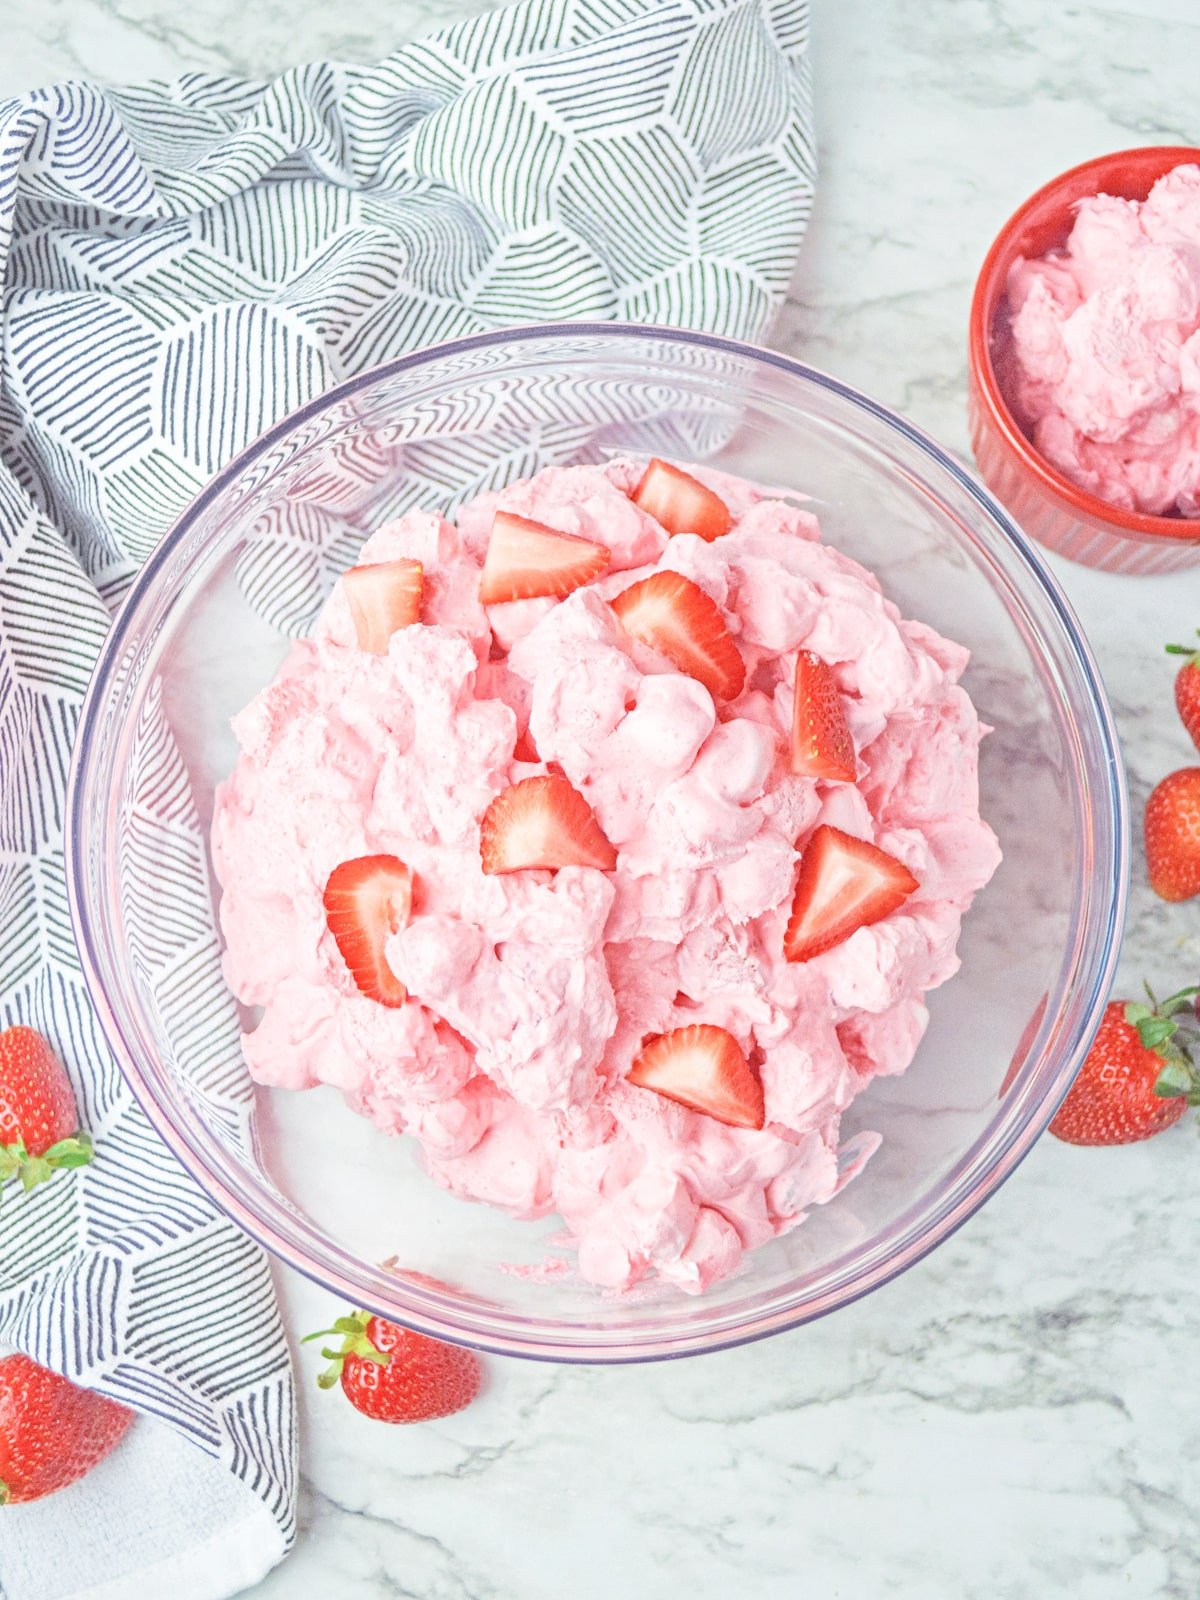 Strawberry Fluff salad in a Serving bowl